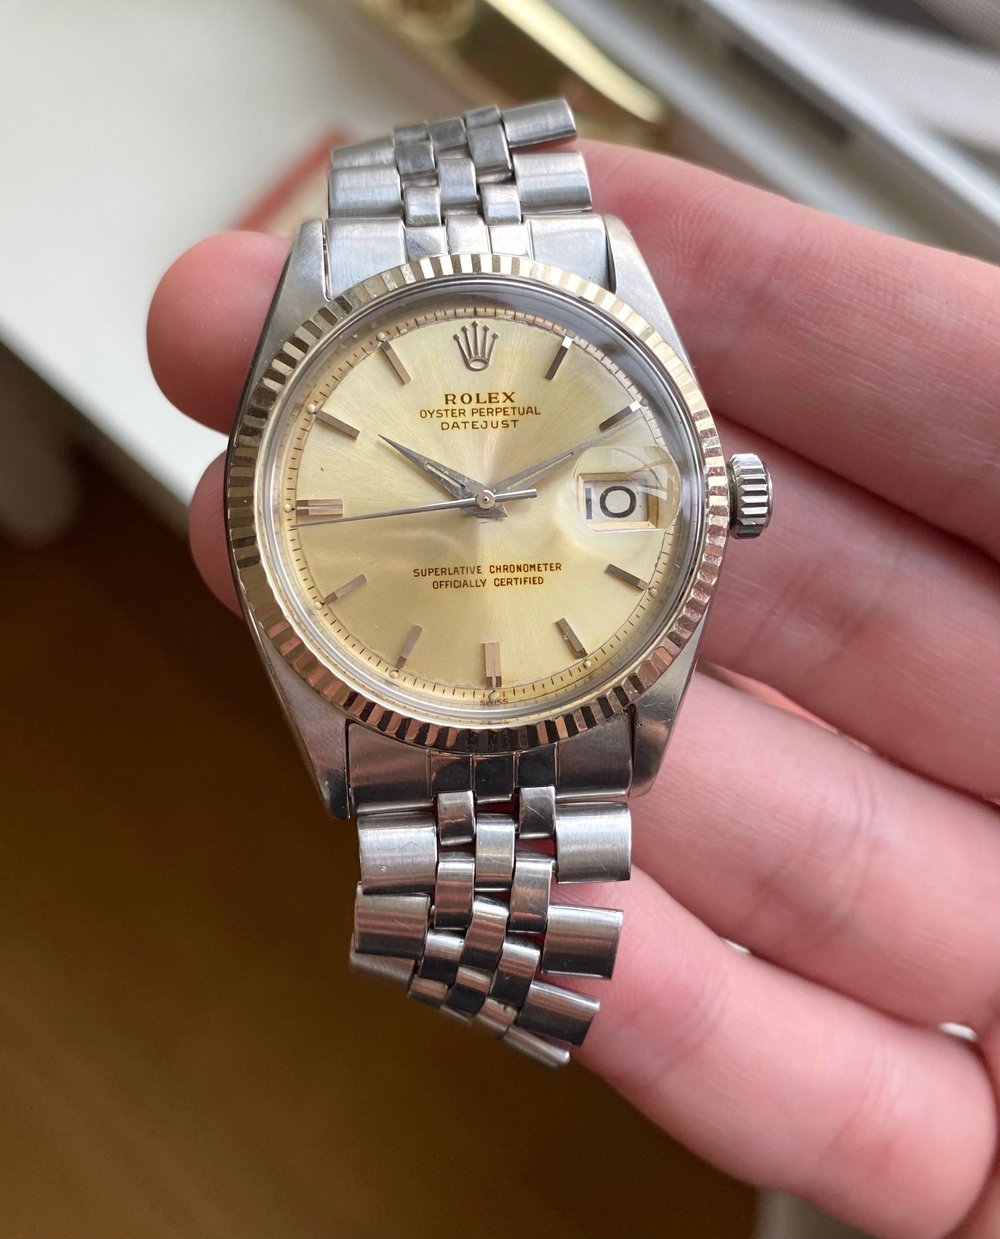 Rolex Oyster Perpetual Datejust Silver Dial 1601 Steel Yellow Gold